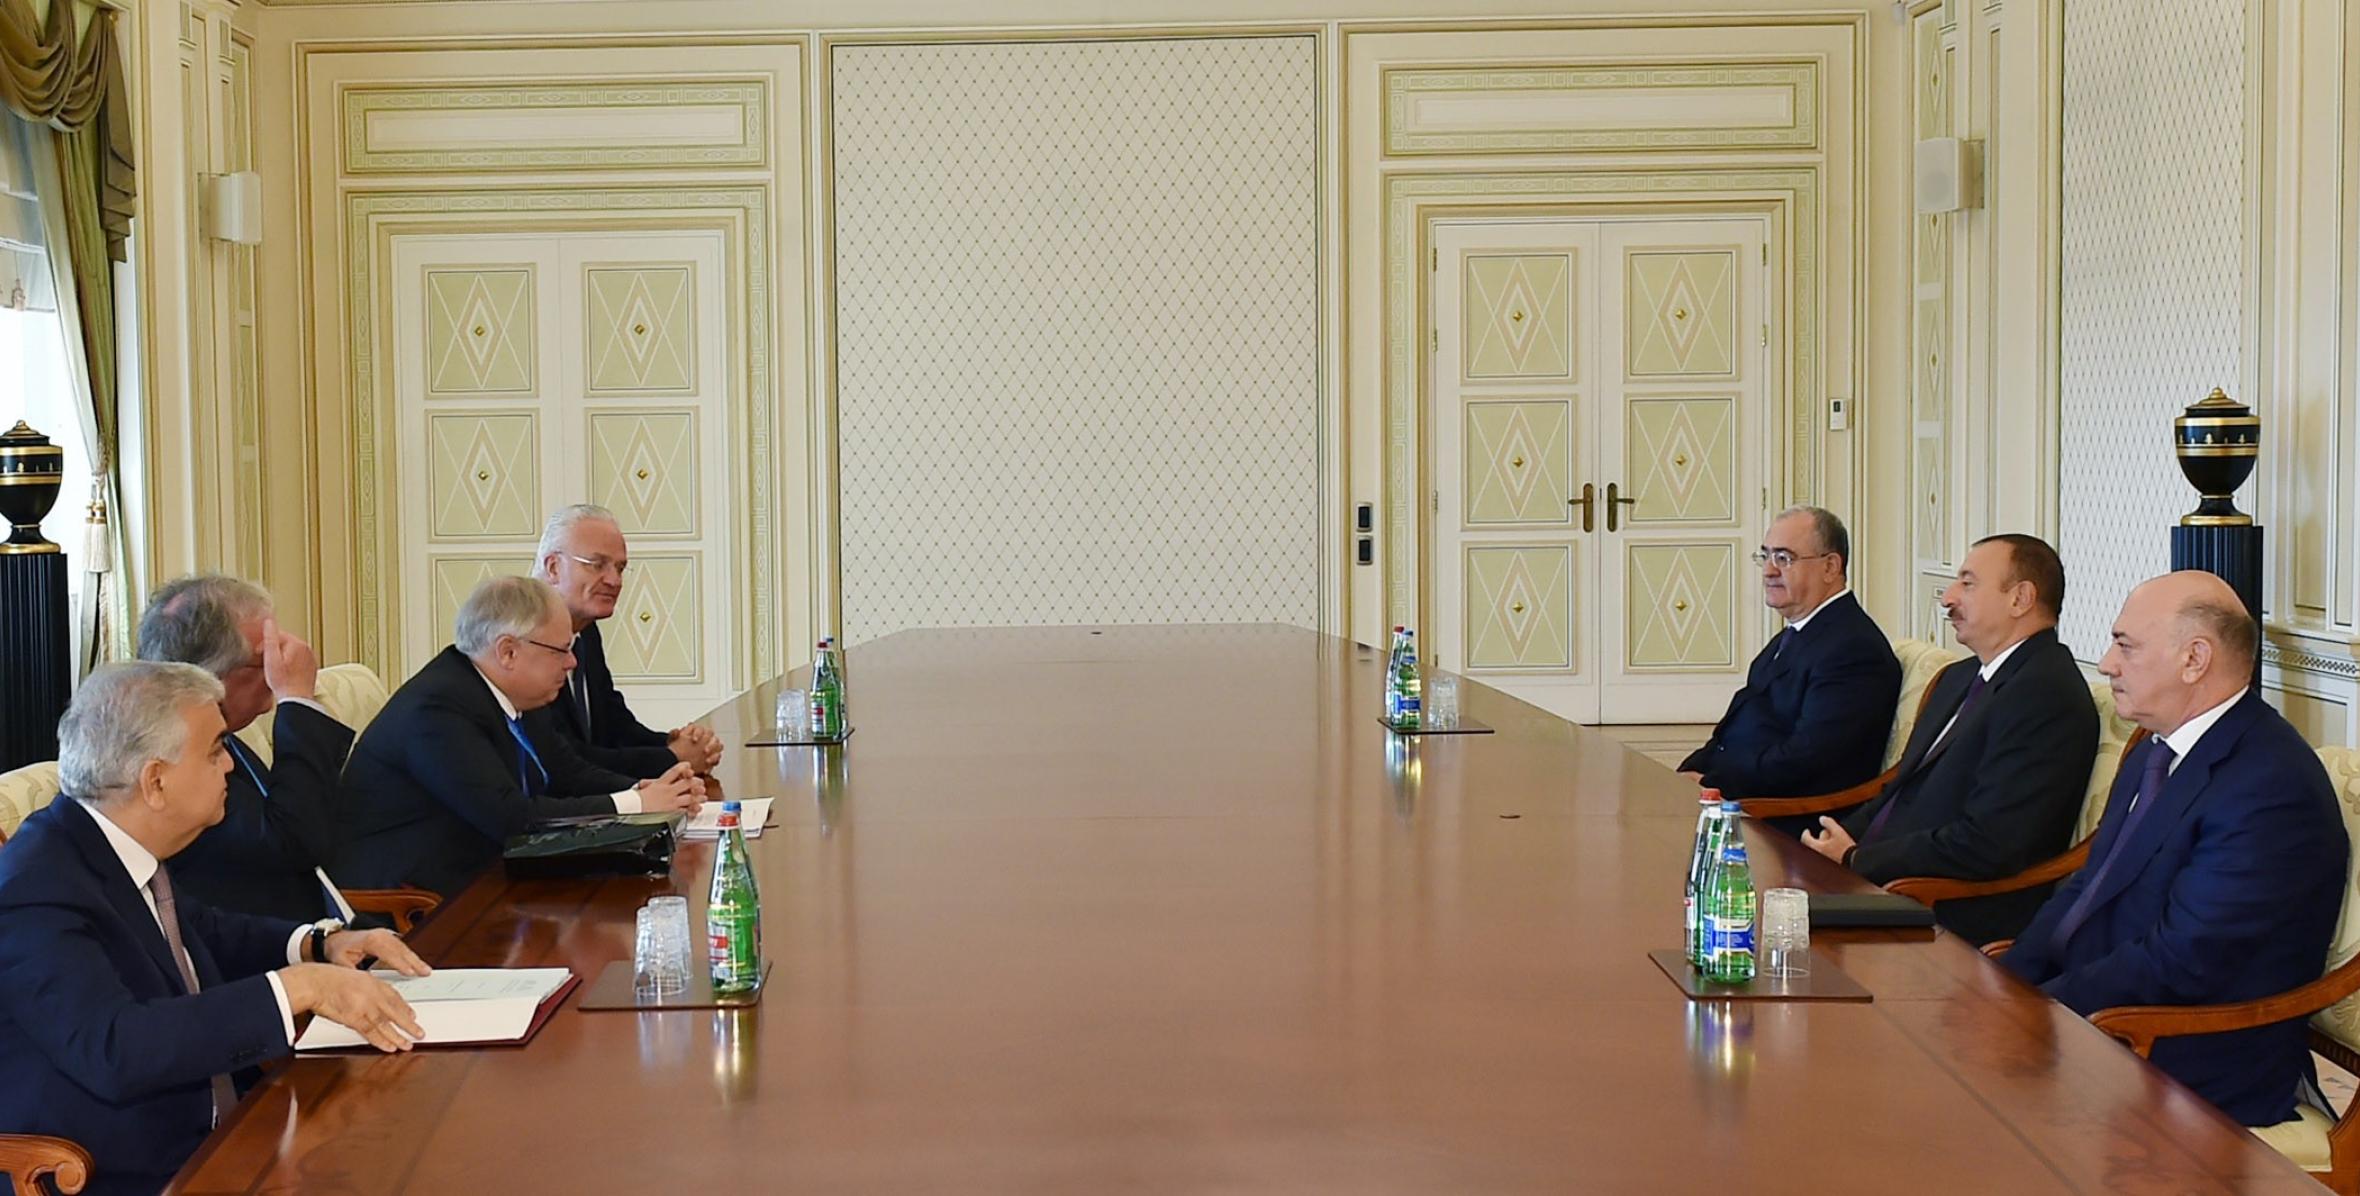 Ilham Aliyev received the President of the European Court of Human Rights